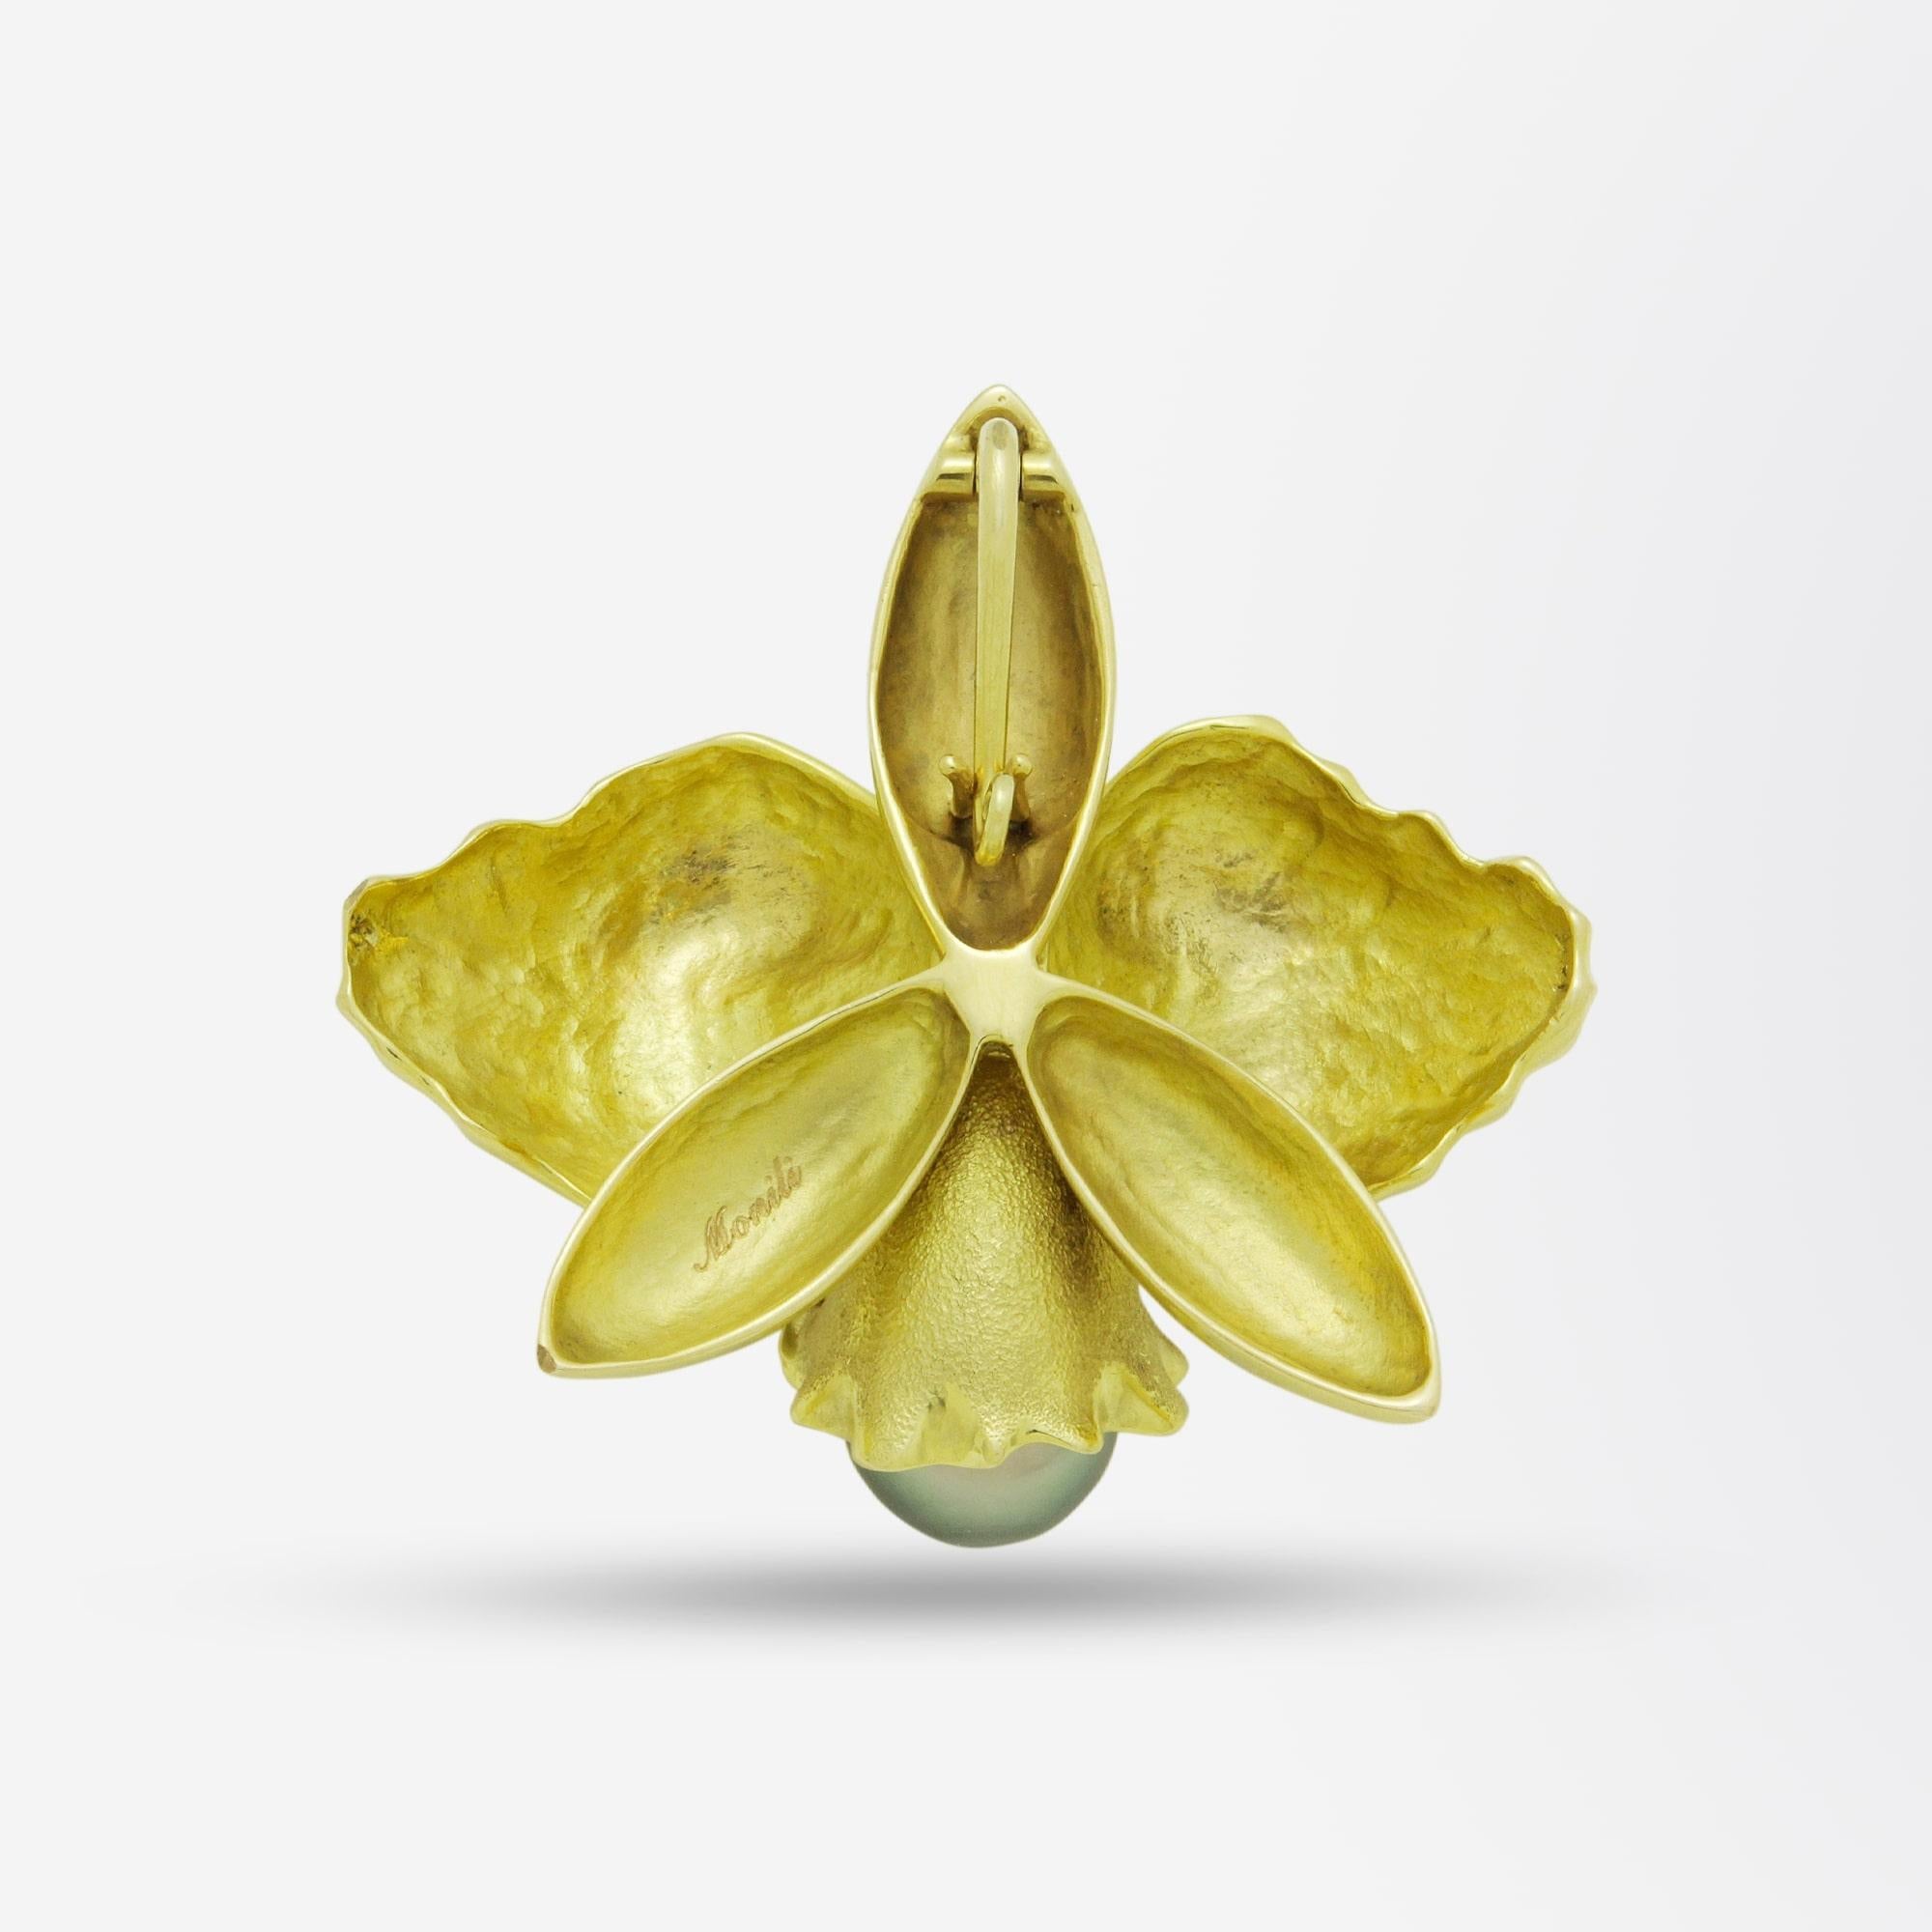 An 18kt yellow gold and Tahitian pearl enhancer pendant in the form of a large orchid. The pendant has a secure hinged bail at the rear, allowing the piece to be clipped over a strand of large pearls, or be used on a chain as a pendant. The gold has